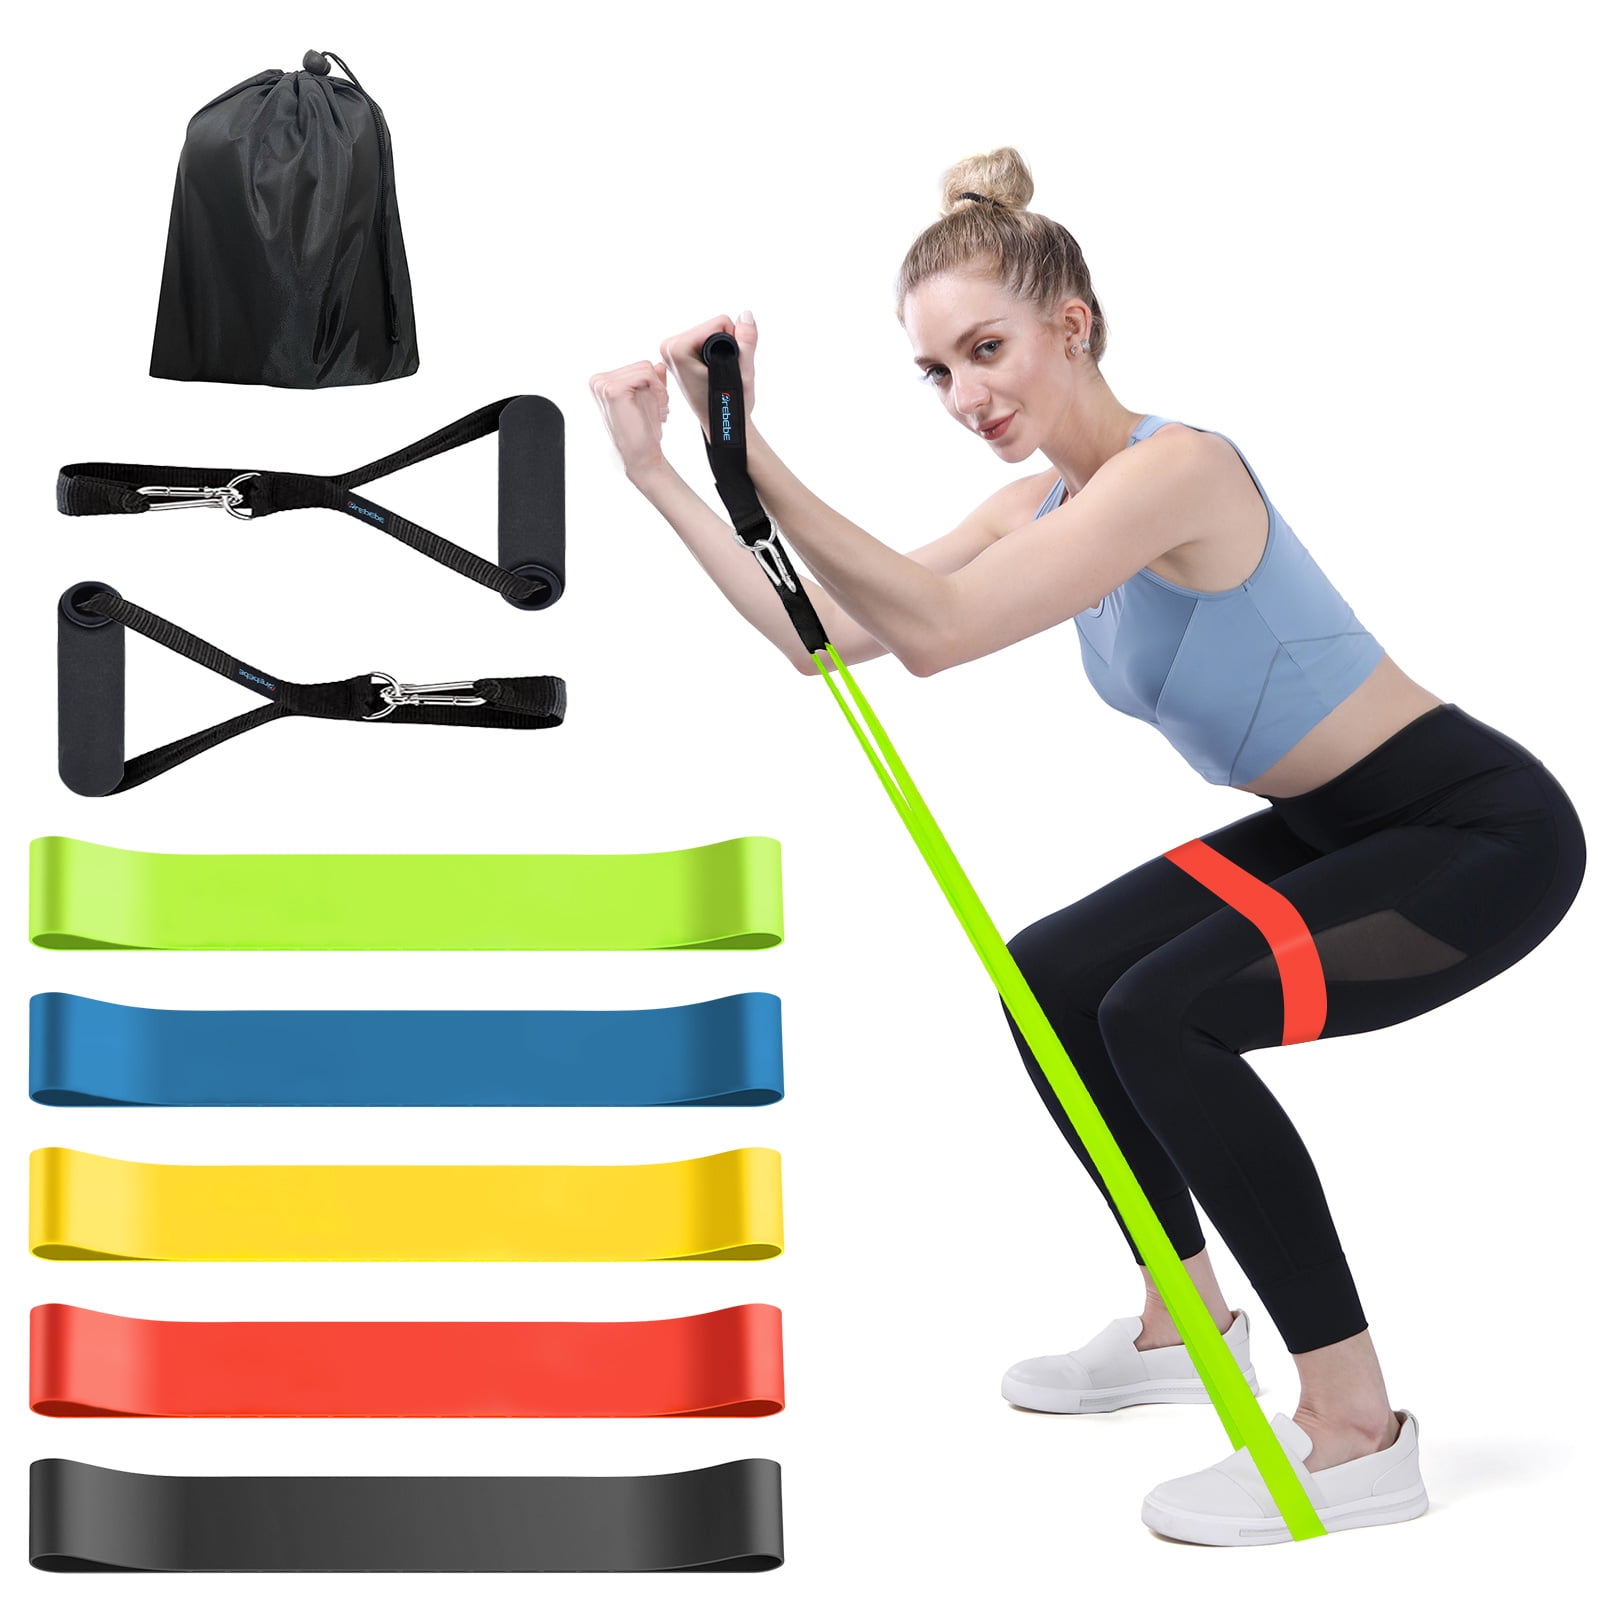 HPYGN Resistance Bands Set, 5 Tube Exercise Bands with Handles